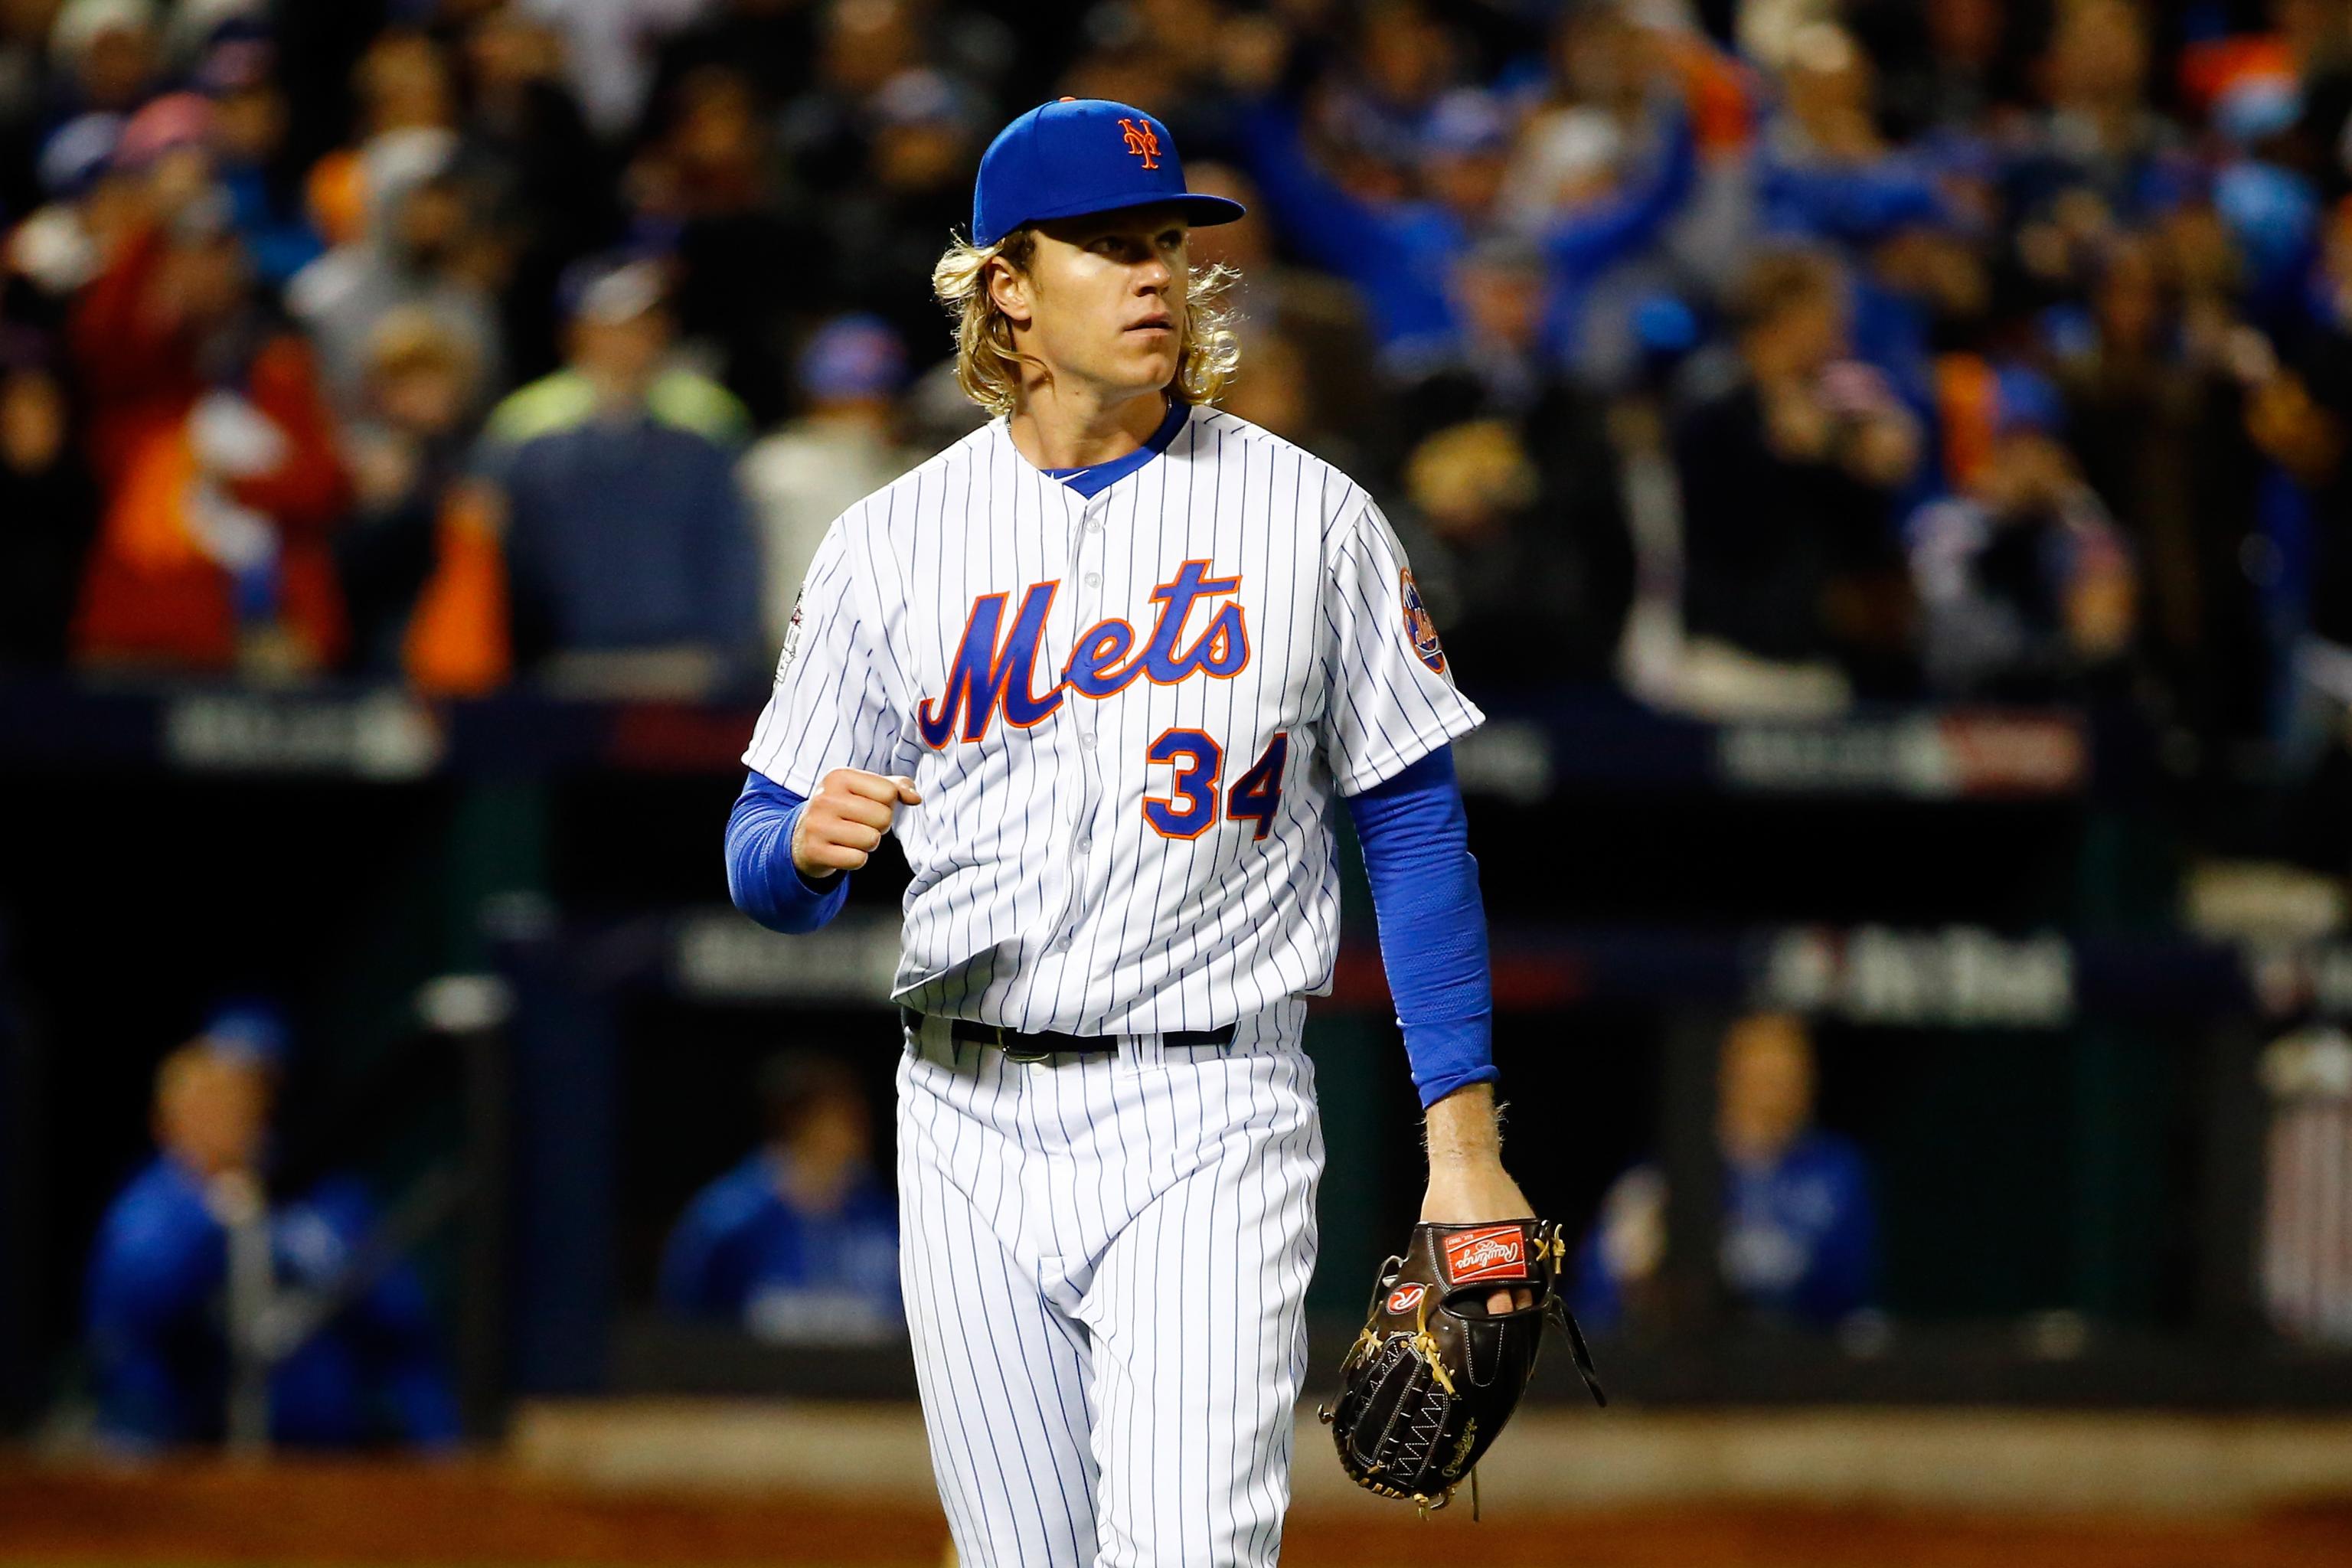 A's Mailbag: 2B issues, and Noah Syndergaard - what would it take